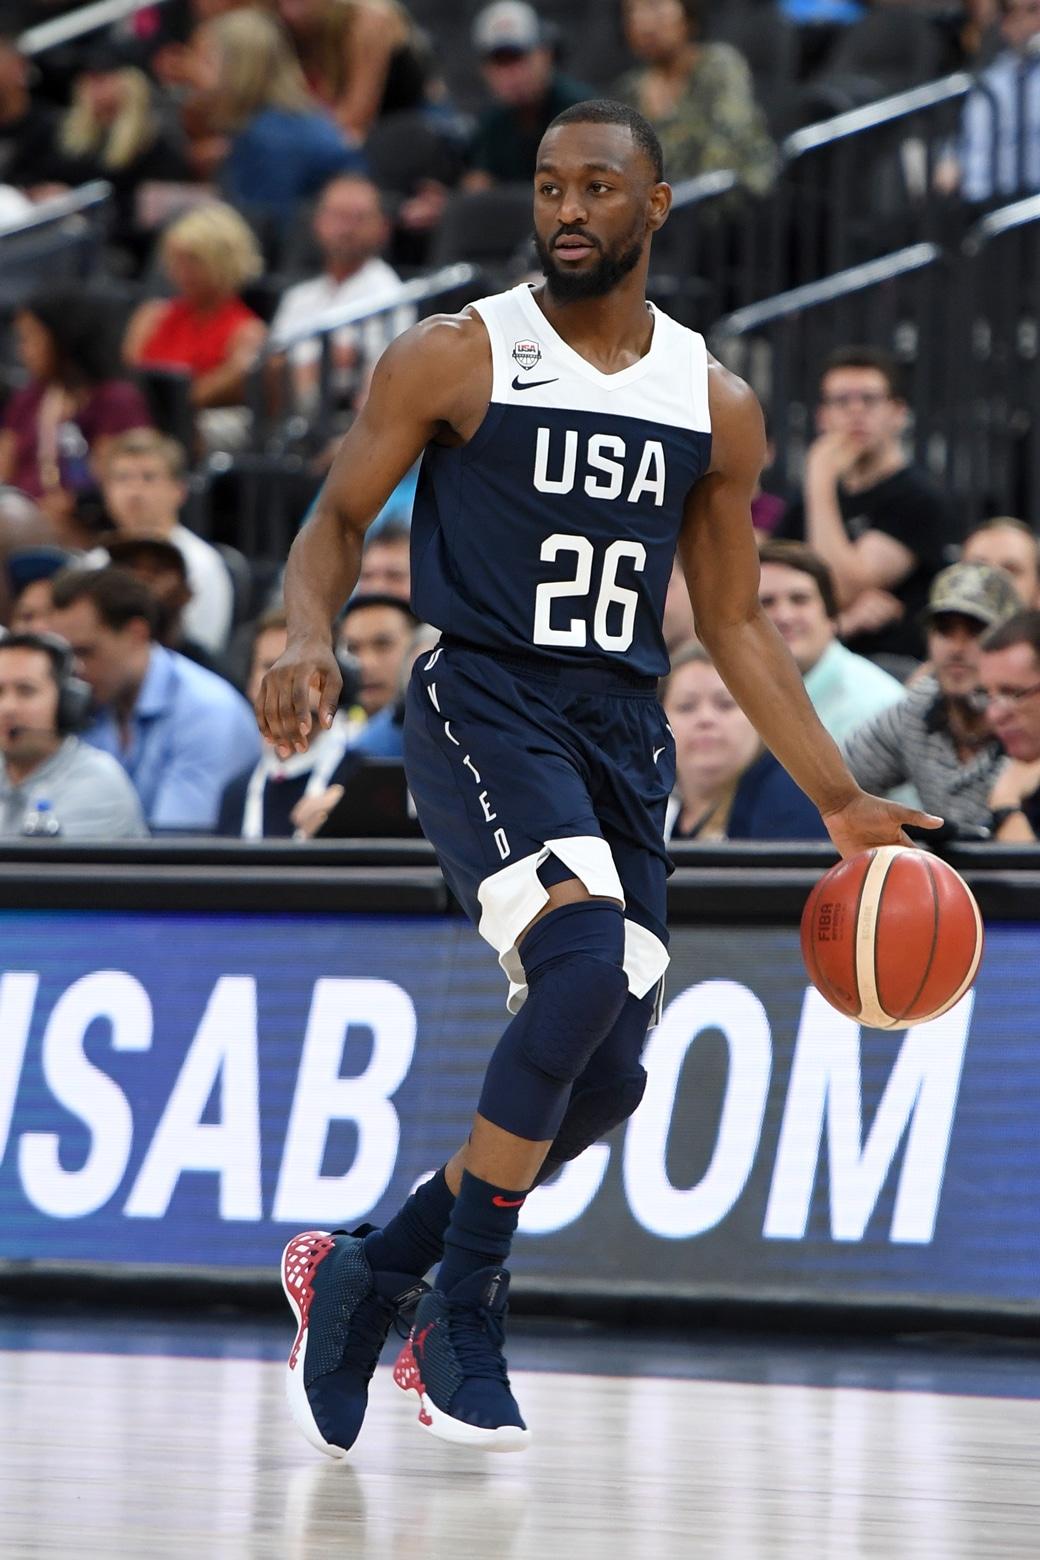 Flipboard: 2019 FIBA Basketball World Cup Preview: Details and Major